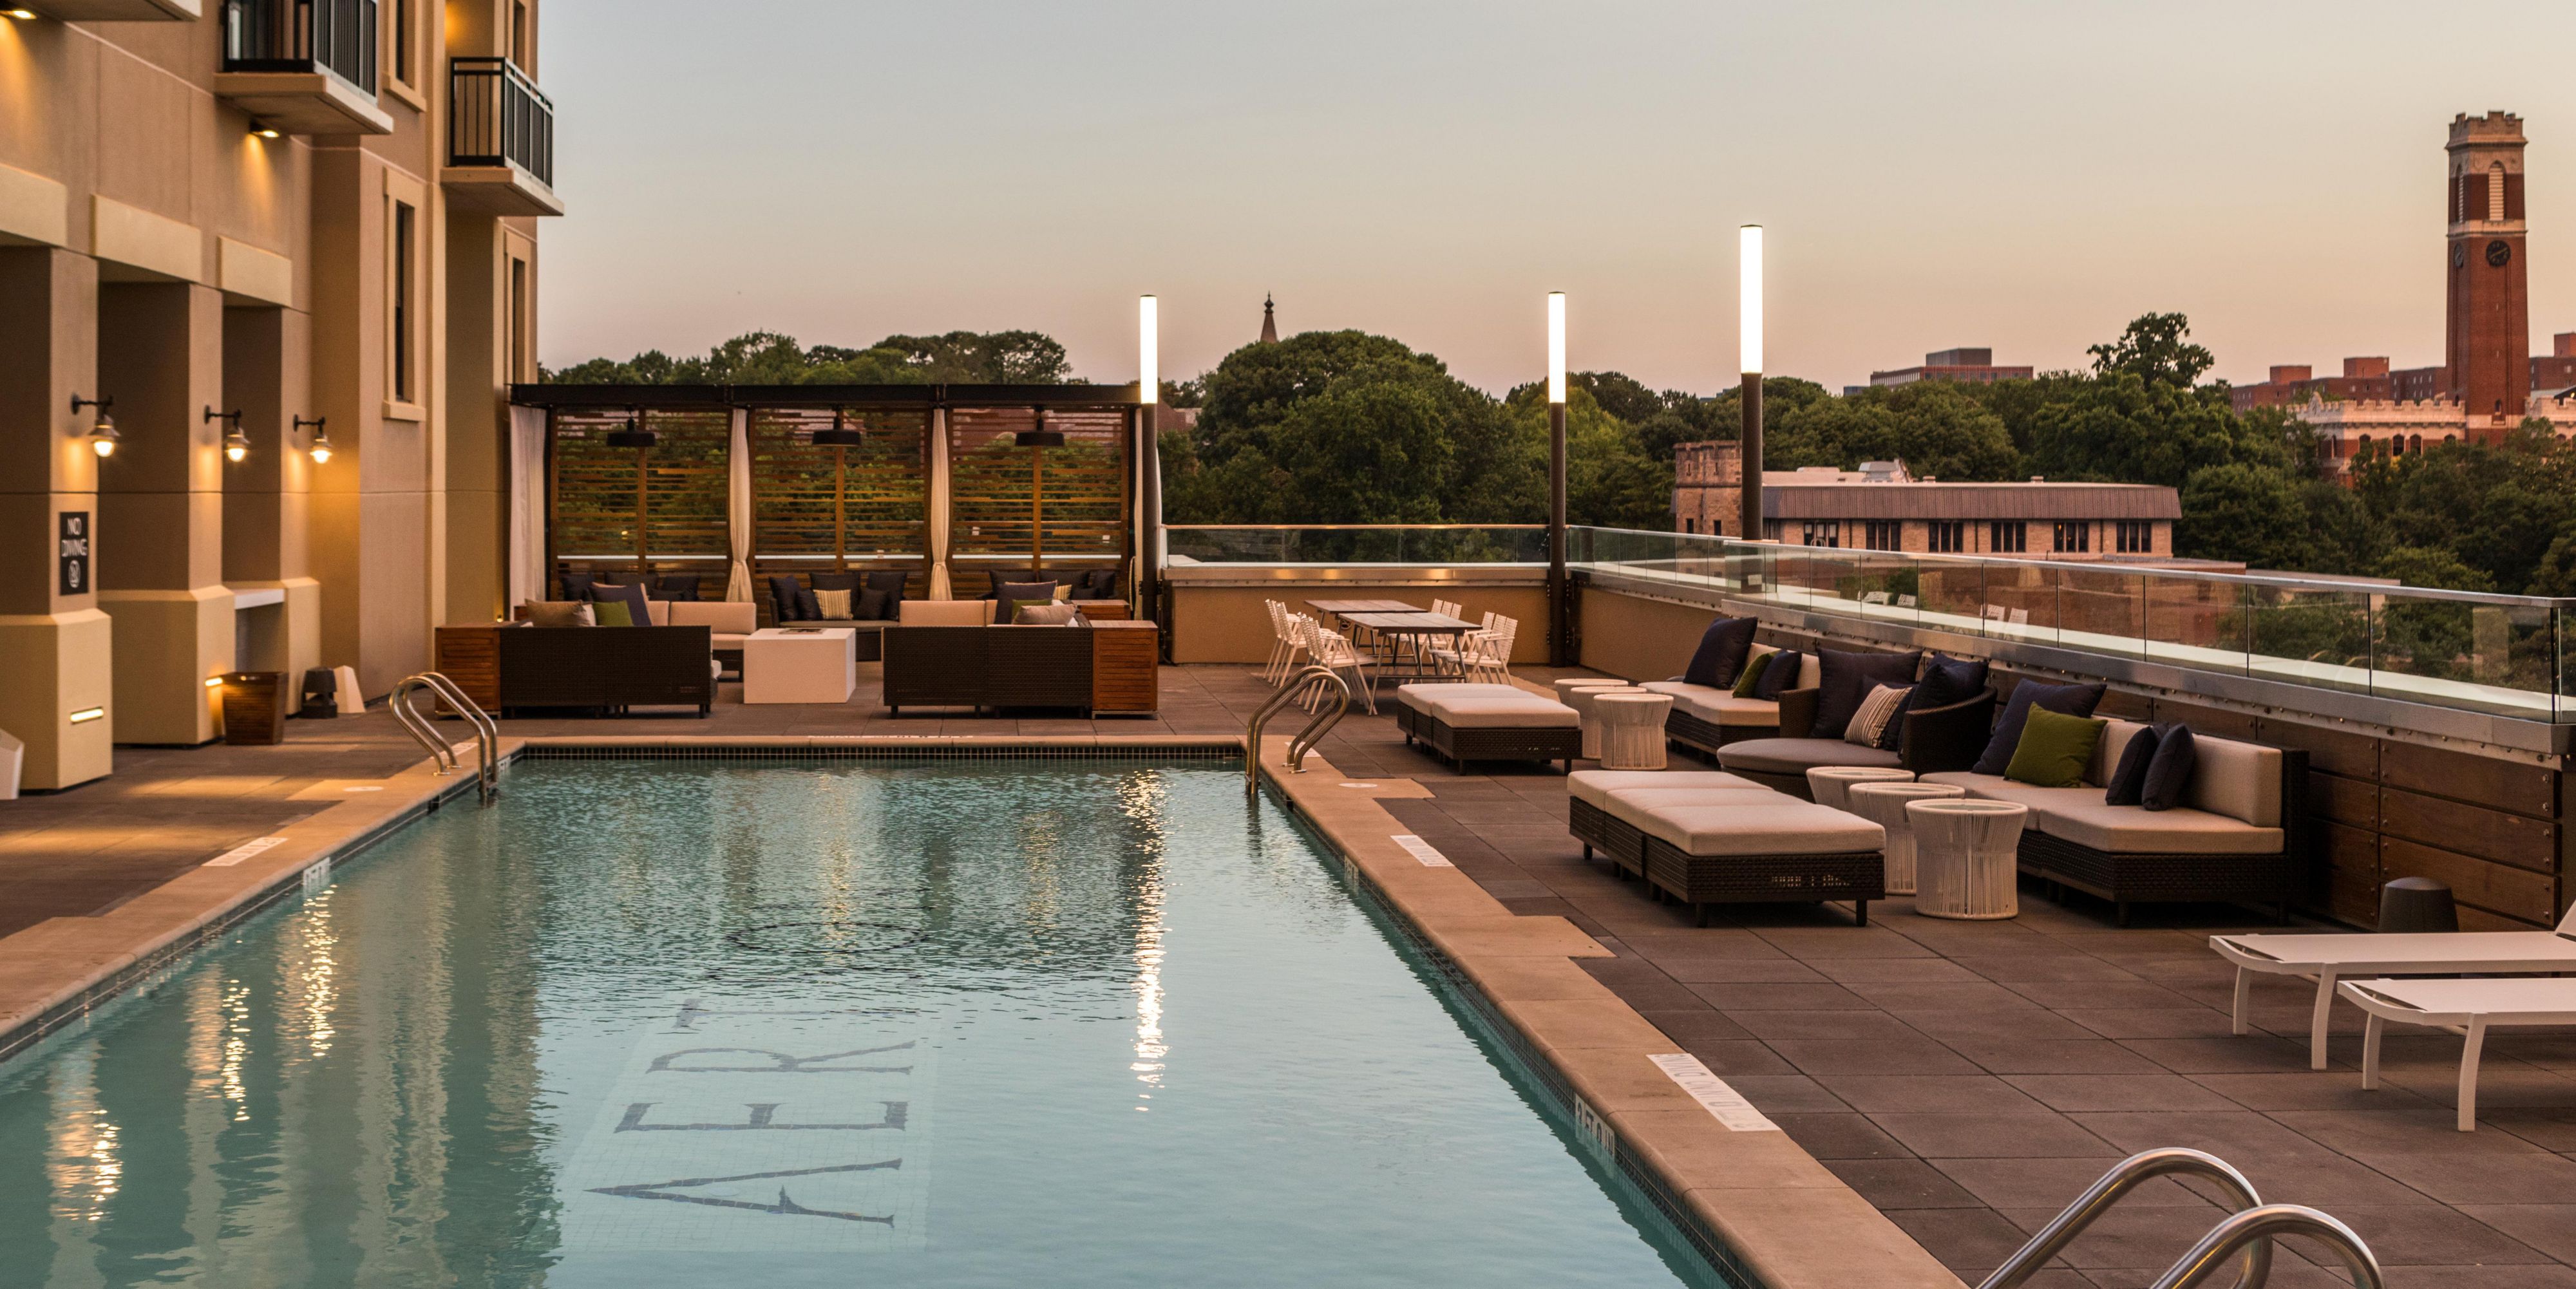 On warm Southern days, we invite you to dip into our seasonal rooftop pool. Unwind in a chaise lounge placed into the refreshing waters at the zero-depth shallow end. Our eighth-floor perch lets you catch a breeze while gazing across midtown Nashville. Throw in cocktails and cabanas and we may just have the coolest pool in Nashville.